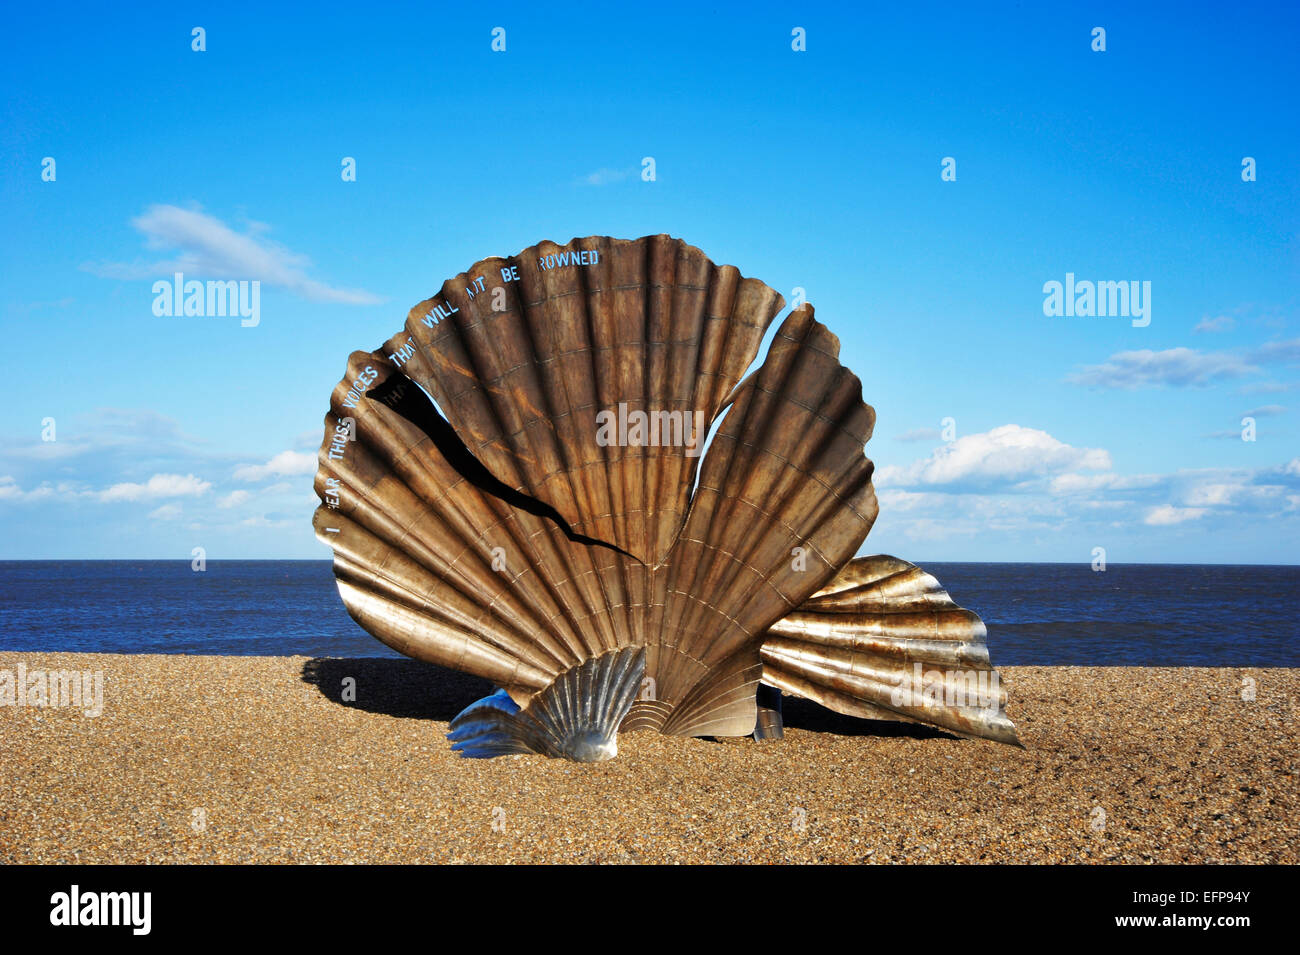 The scallop shell sculpture designed by Maggi Hambling, made by Sam Pegg, Dennis Pegg, on Aldeburgh, beach, Suffolk, England. Stock Photo